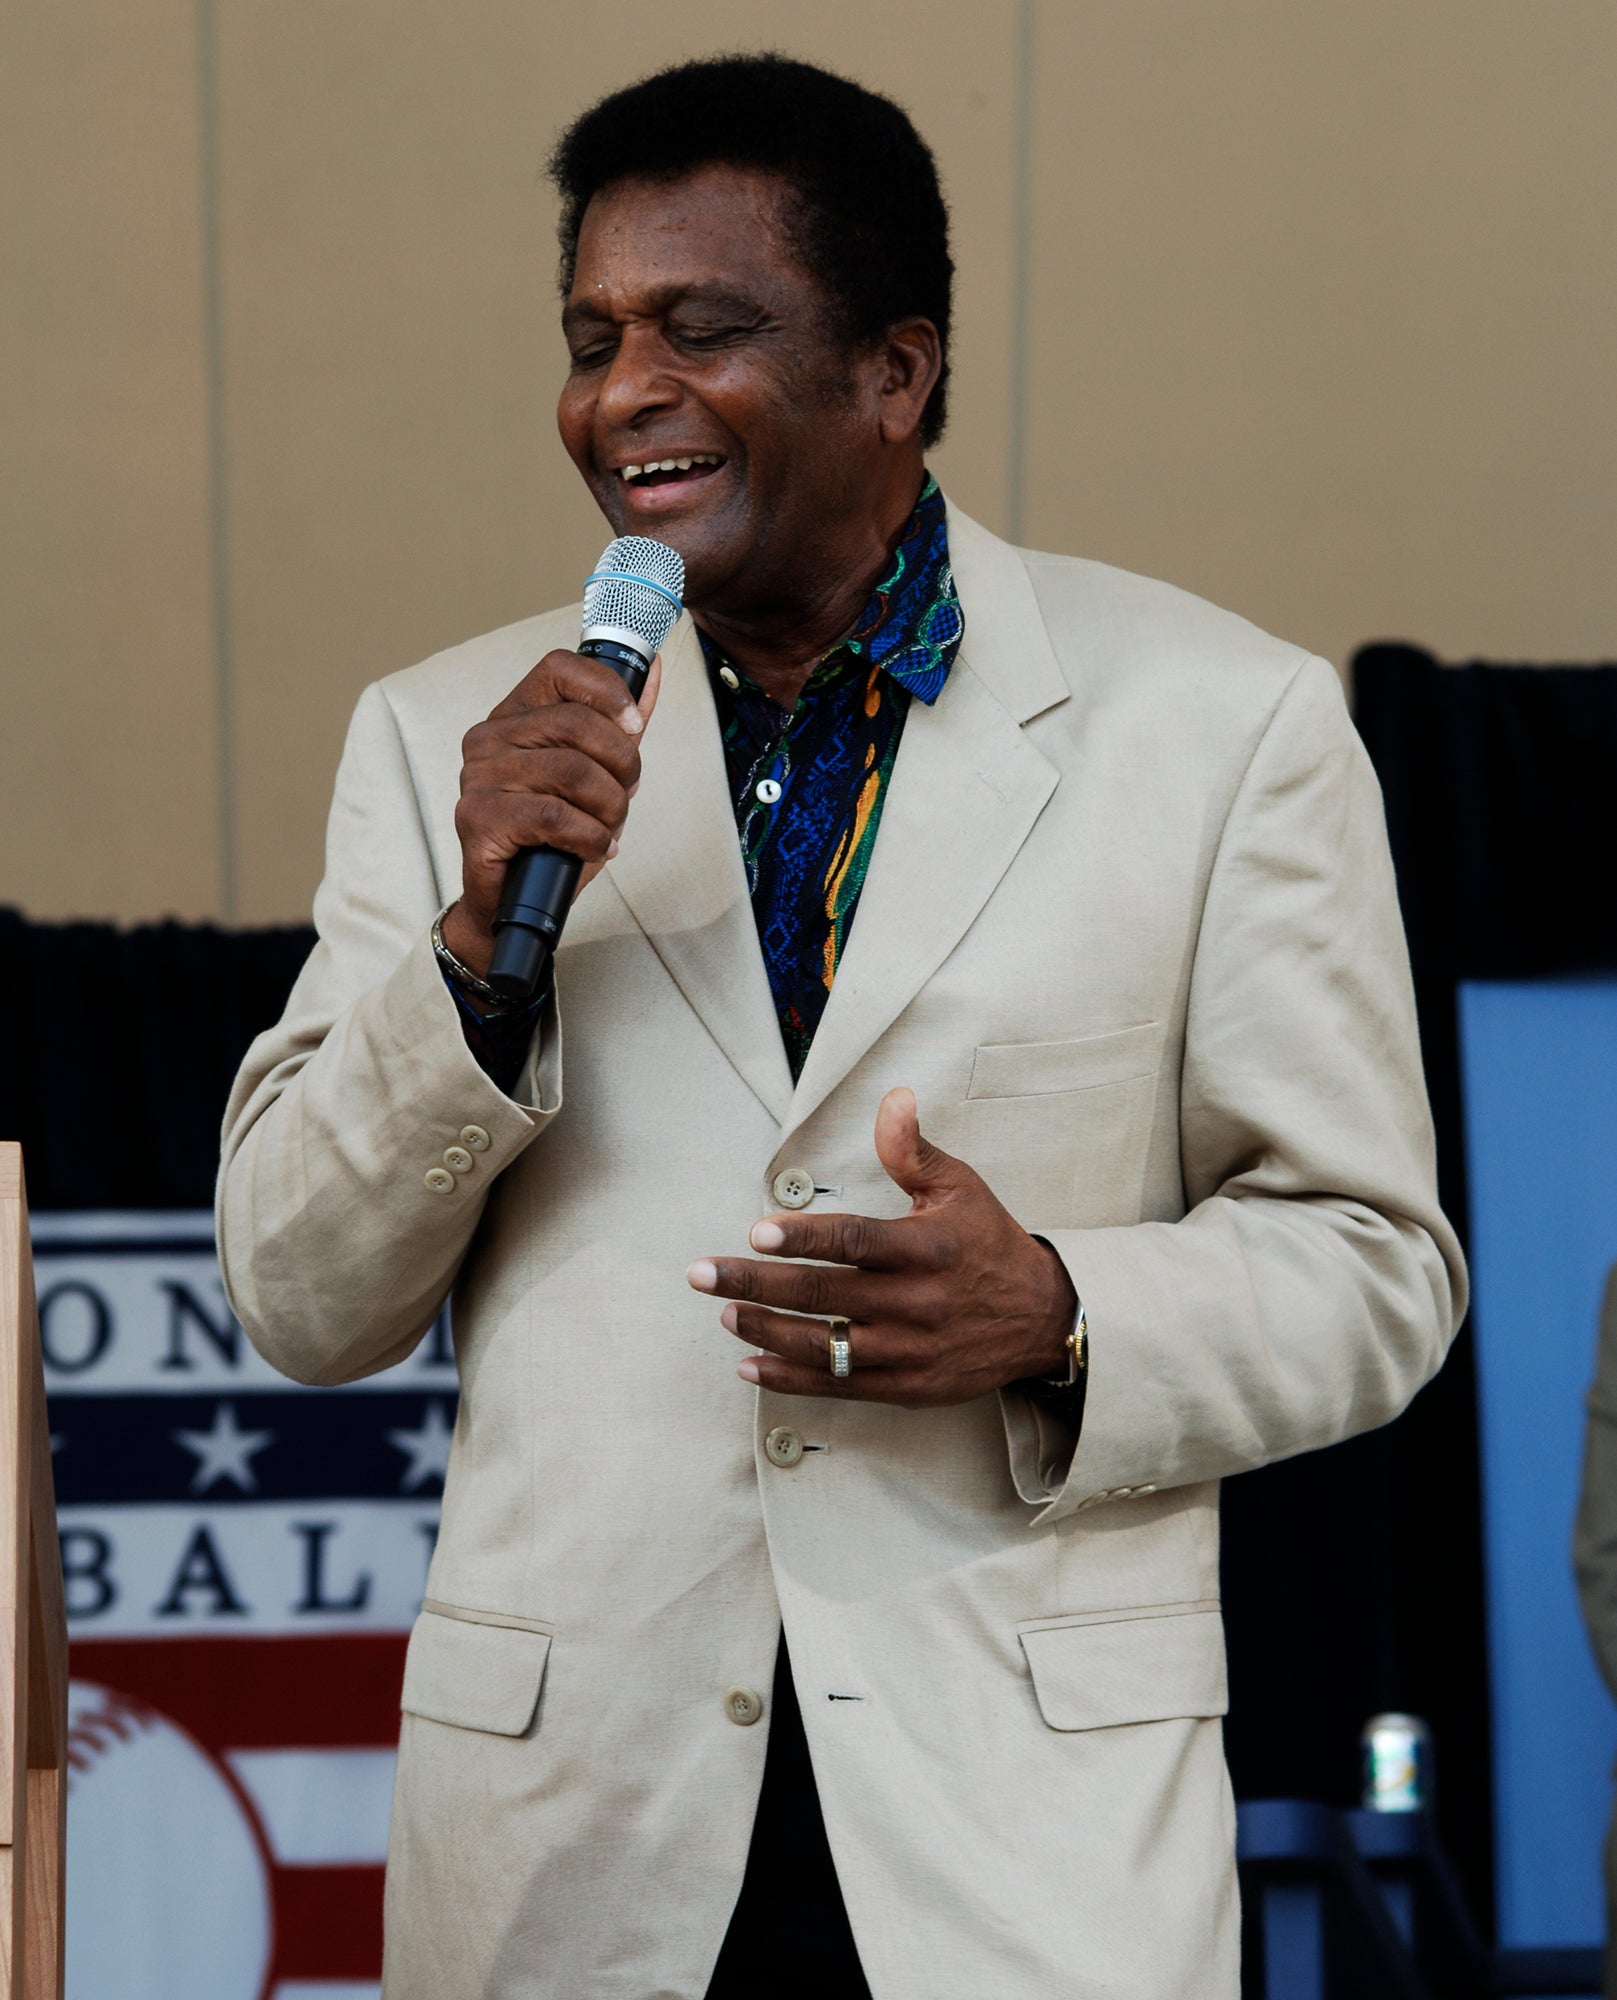 Charley Pride was a star on the field and at the mic